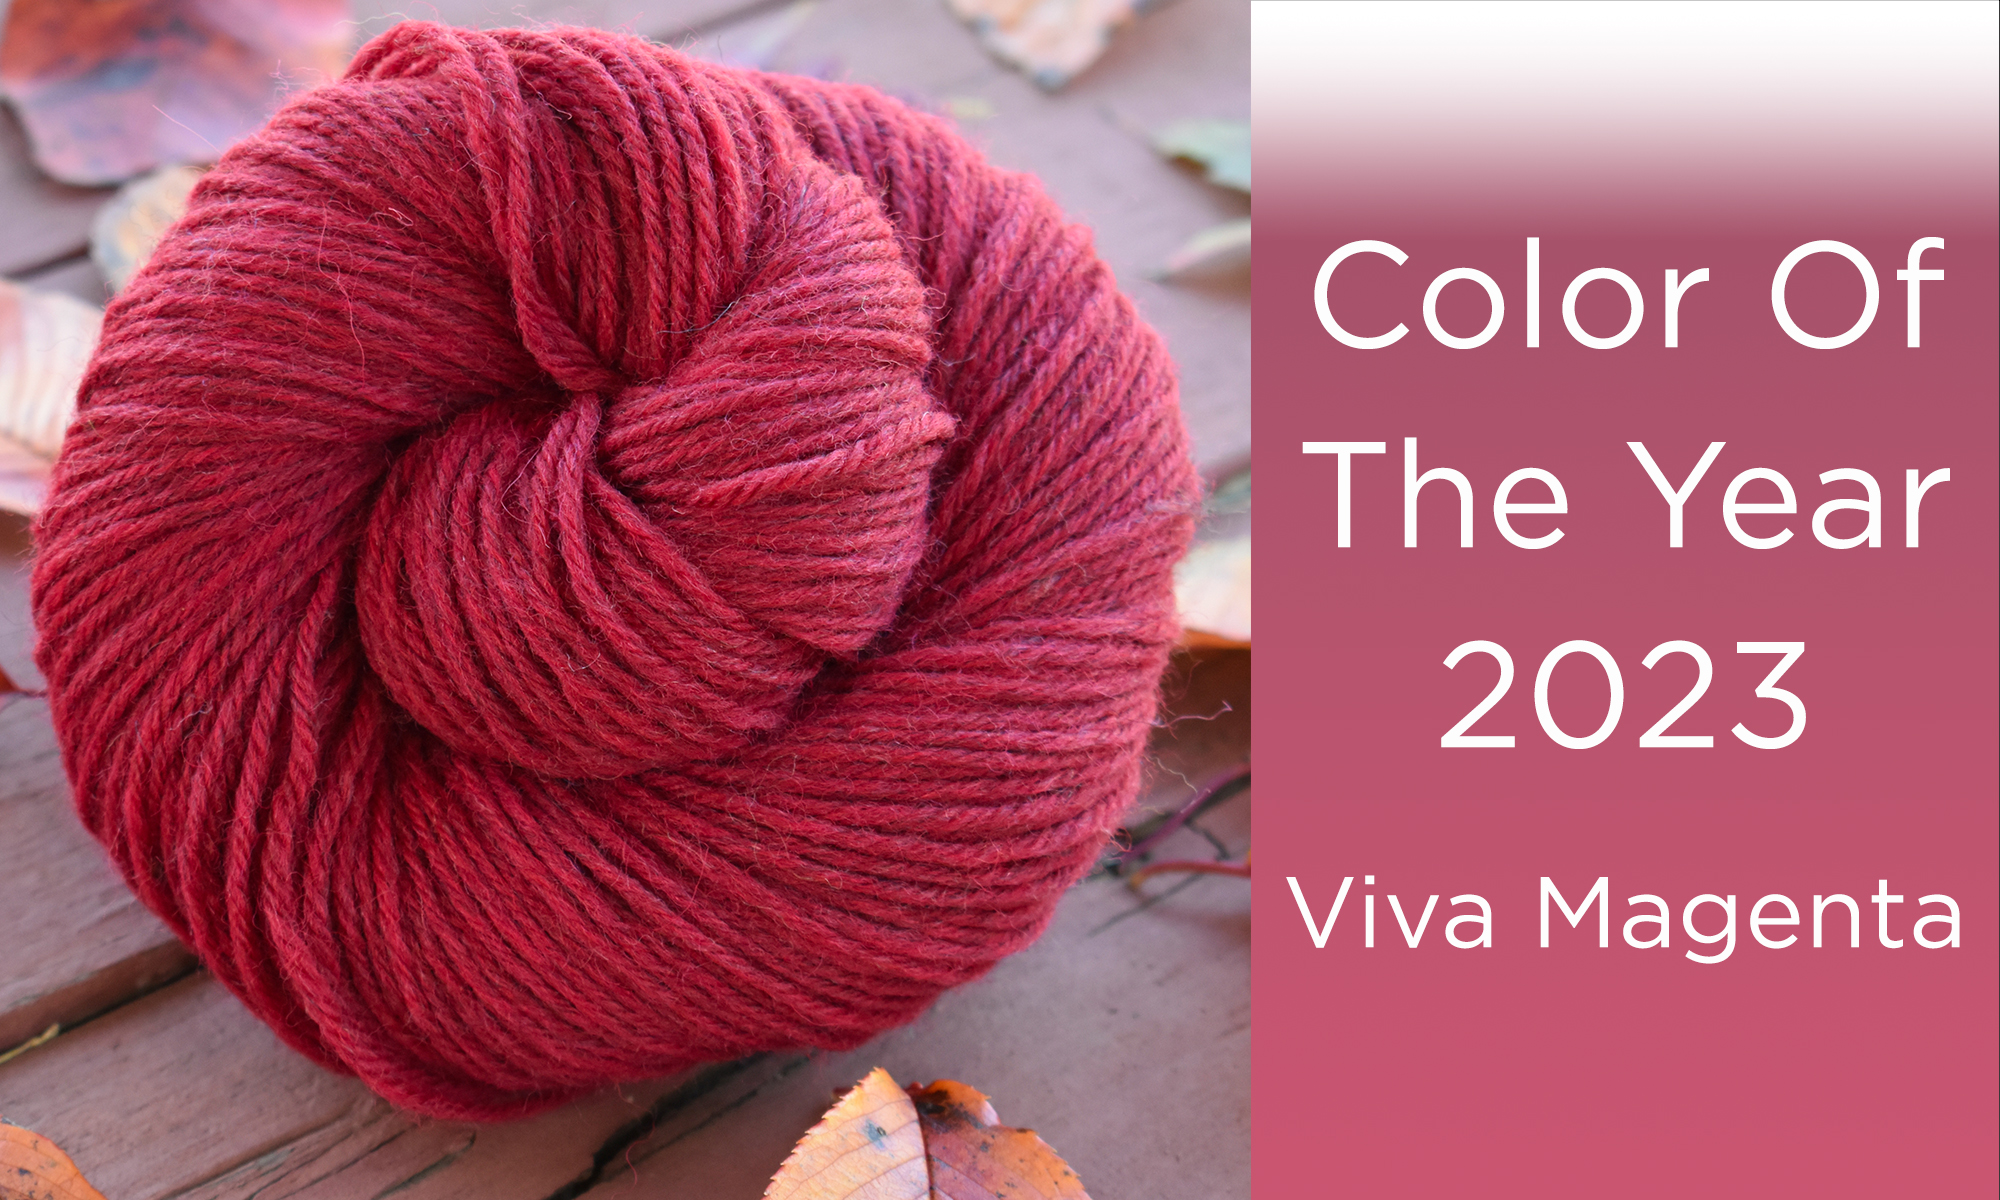 Color us surprised: Viva Magenta is Pantone's 2023 Color of the Year